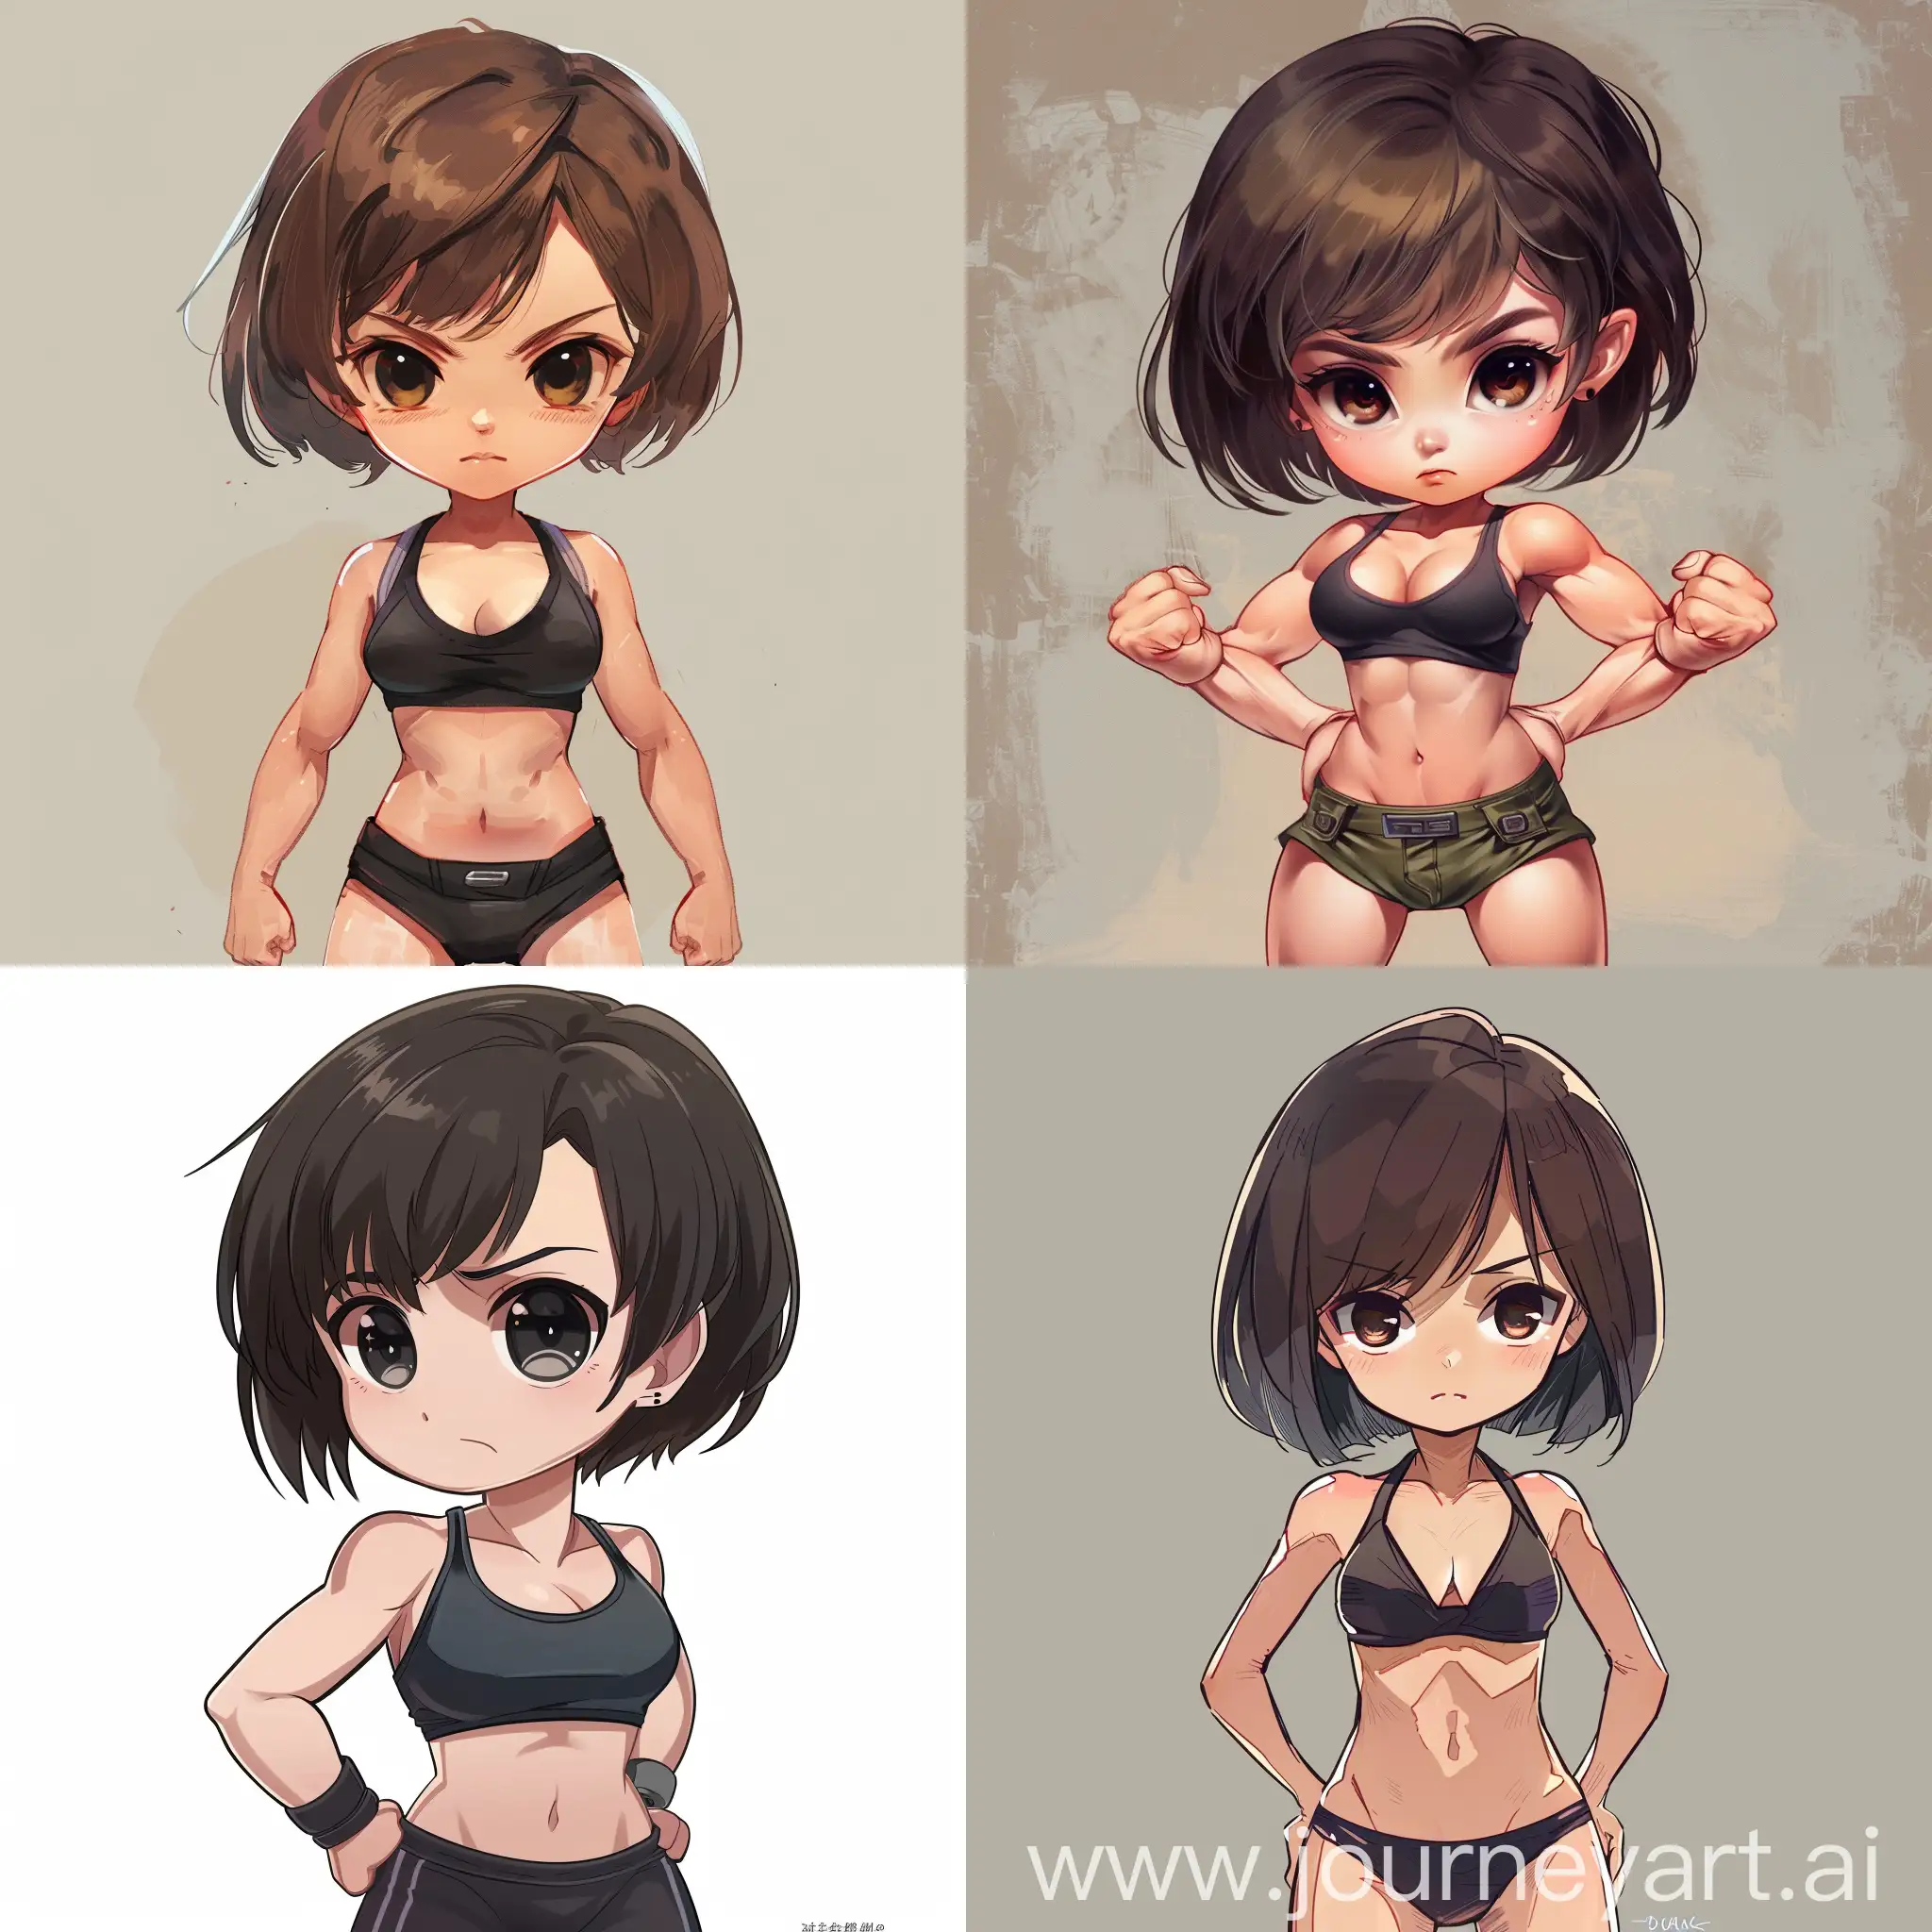 Chibi-Girl-with-Muscular-Slim-Build-and-Short-Hair